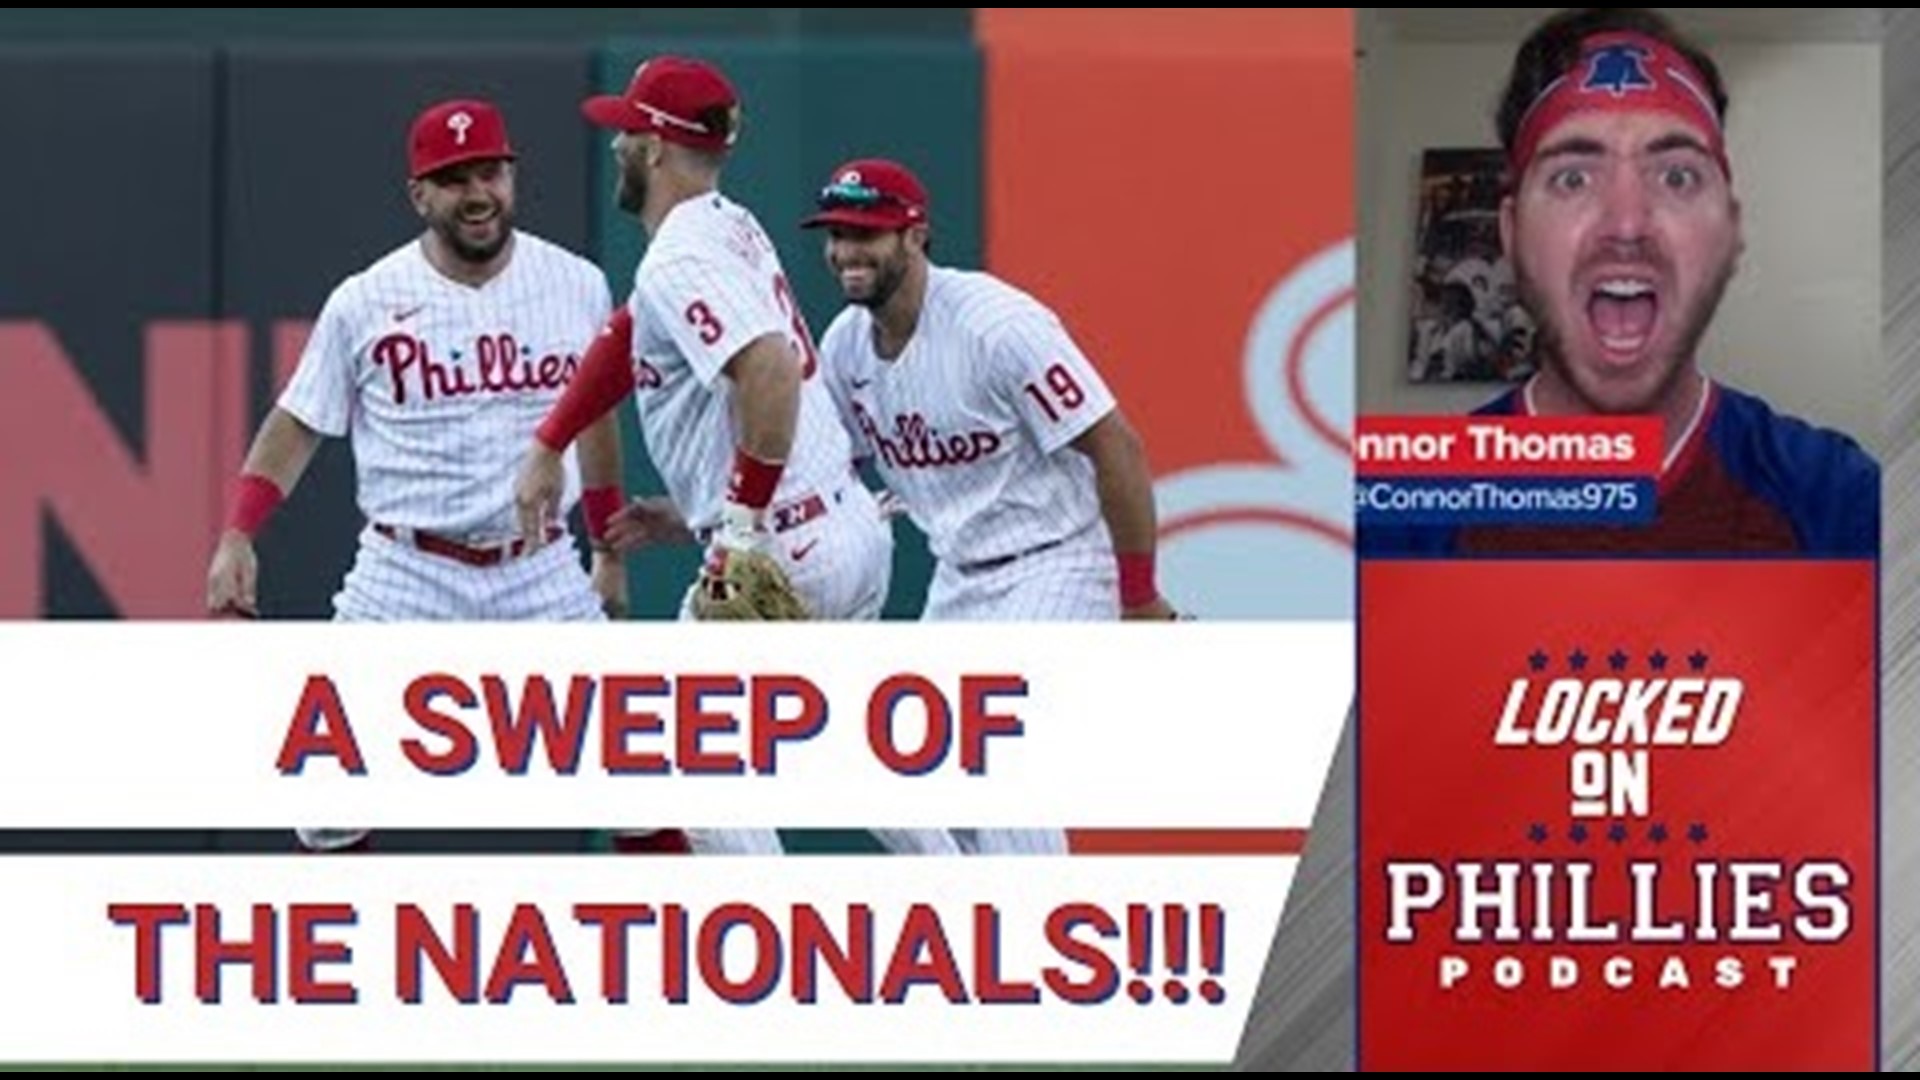 The Philadelphia Phillies completed a 3 game sweep of the Washington Nationals at Citizens Bank Park, and will now face the Marlins in Miami.